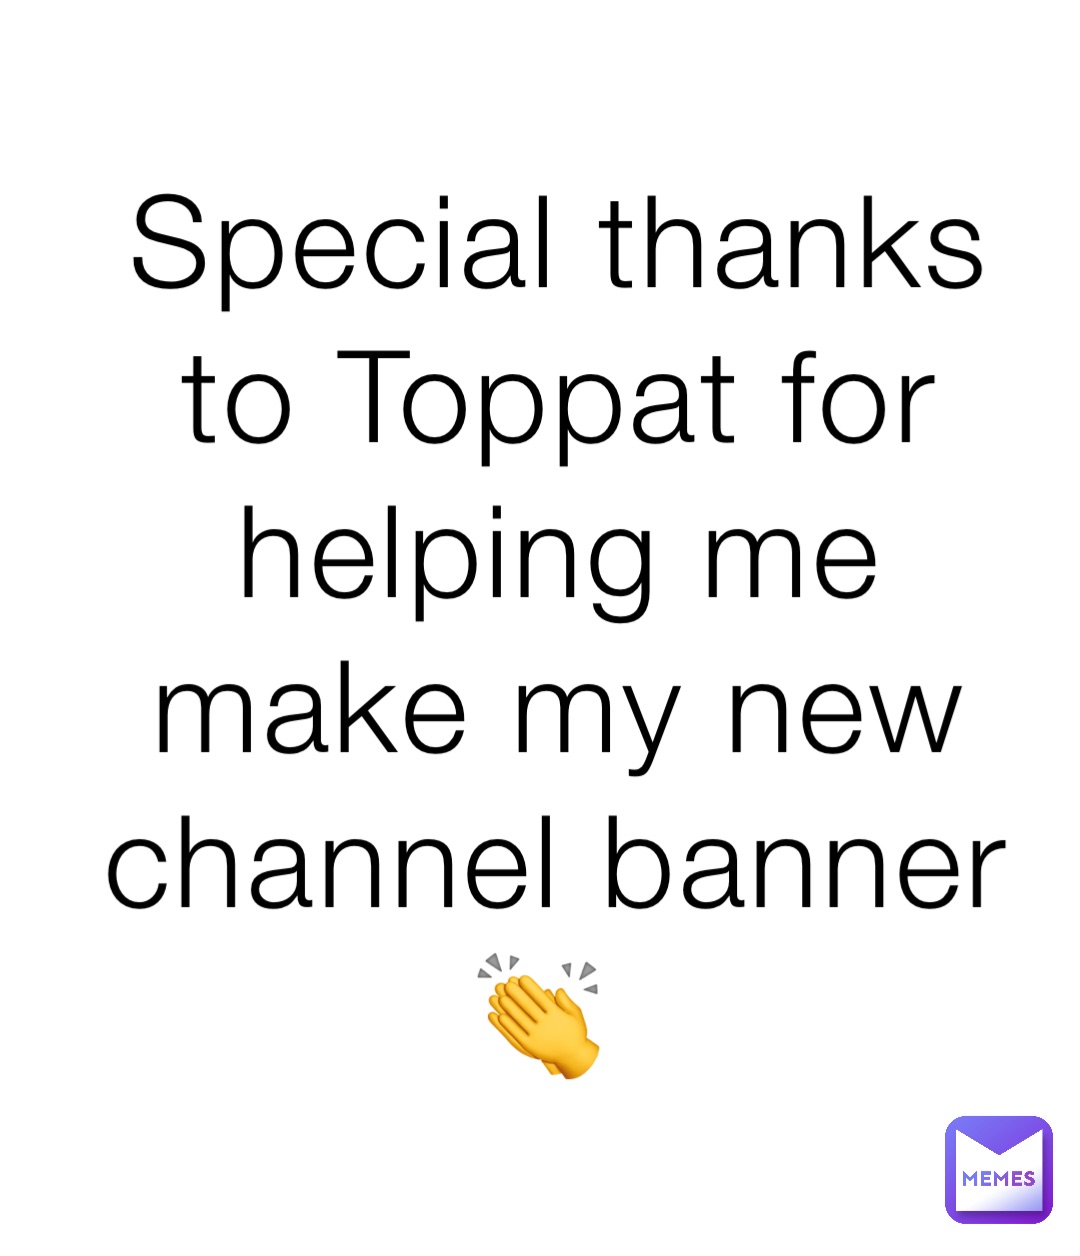 Special thanks to Toppat for helping me make my new channel banner 👏